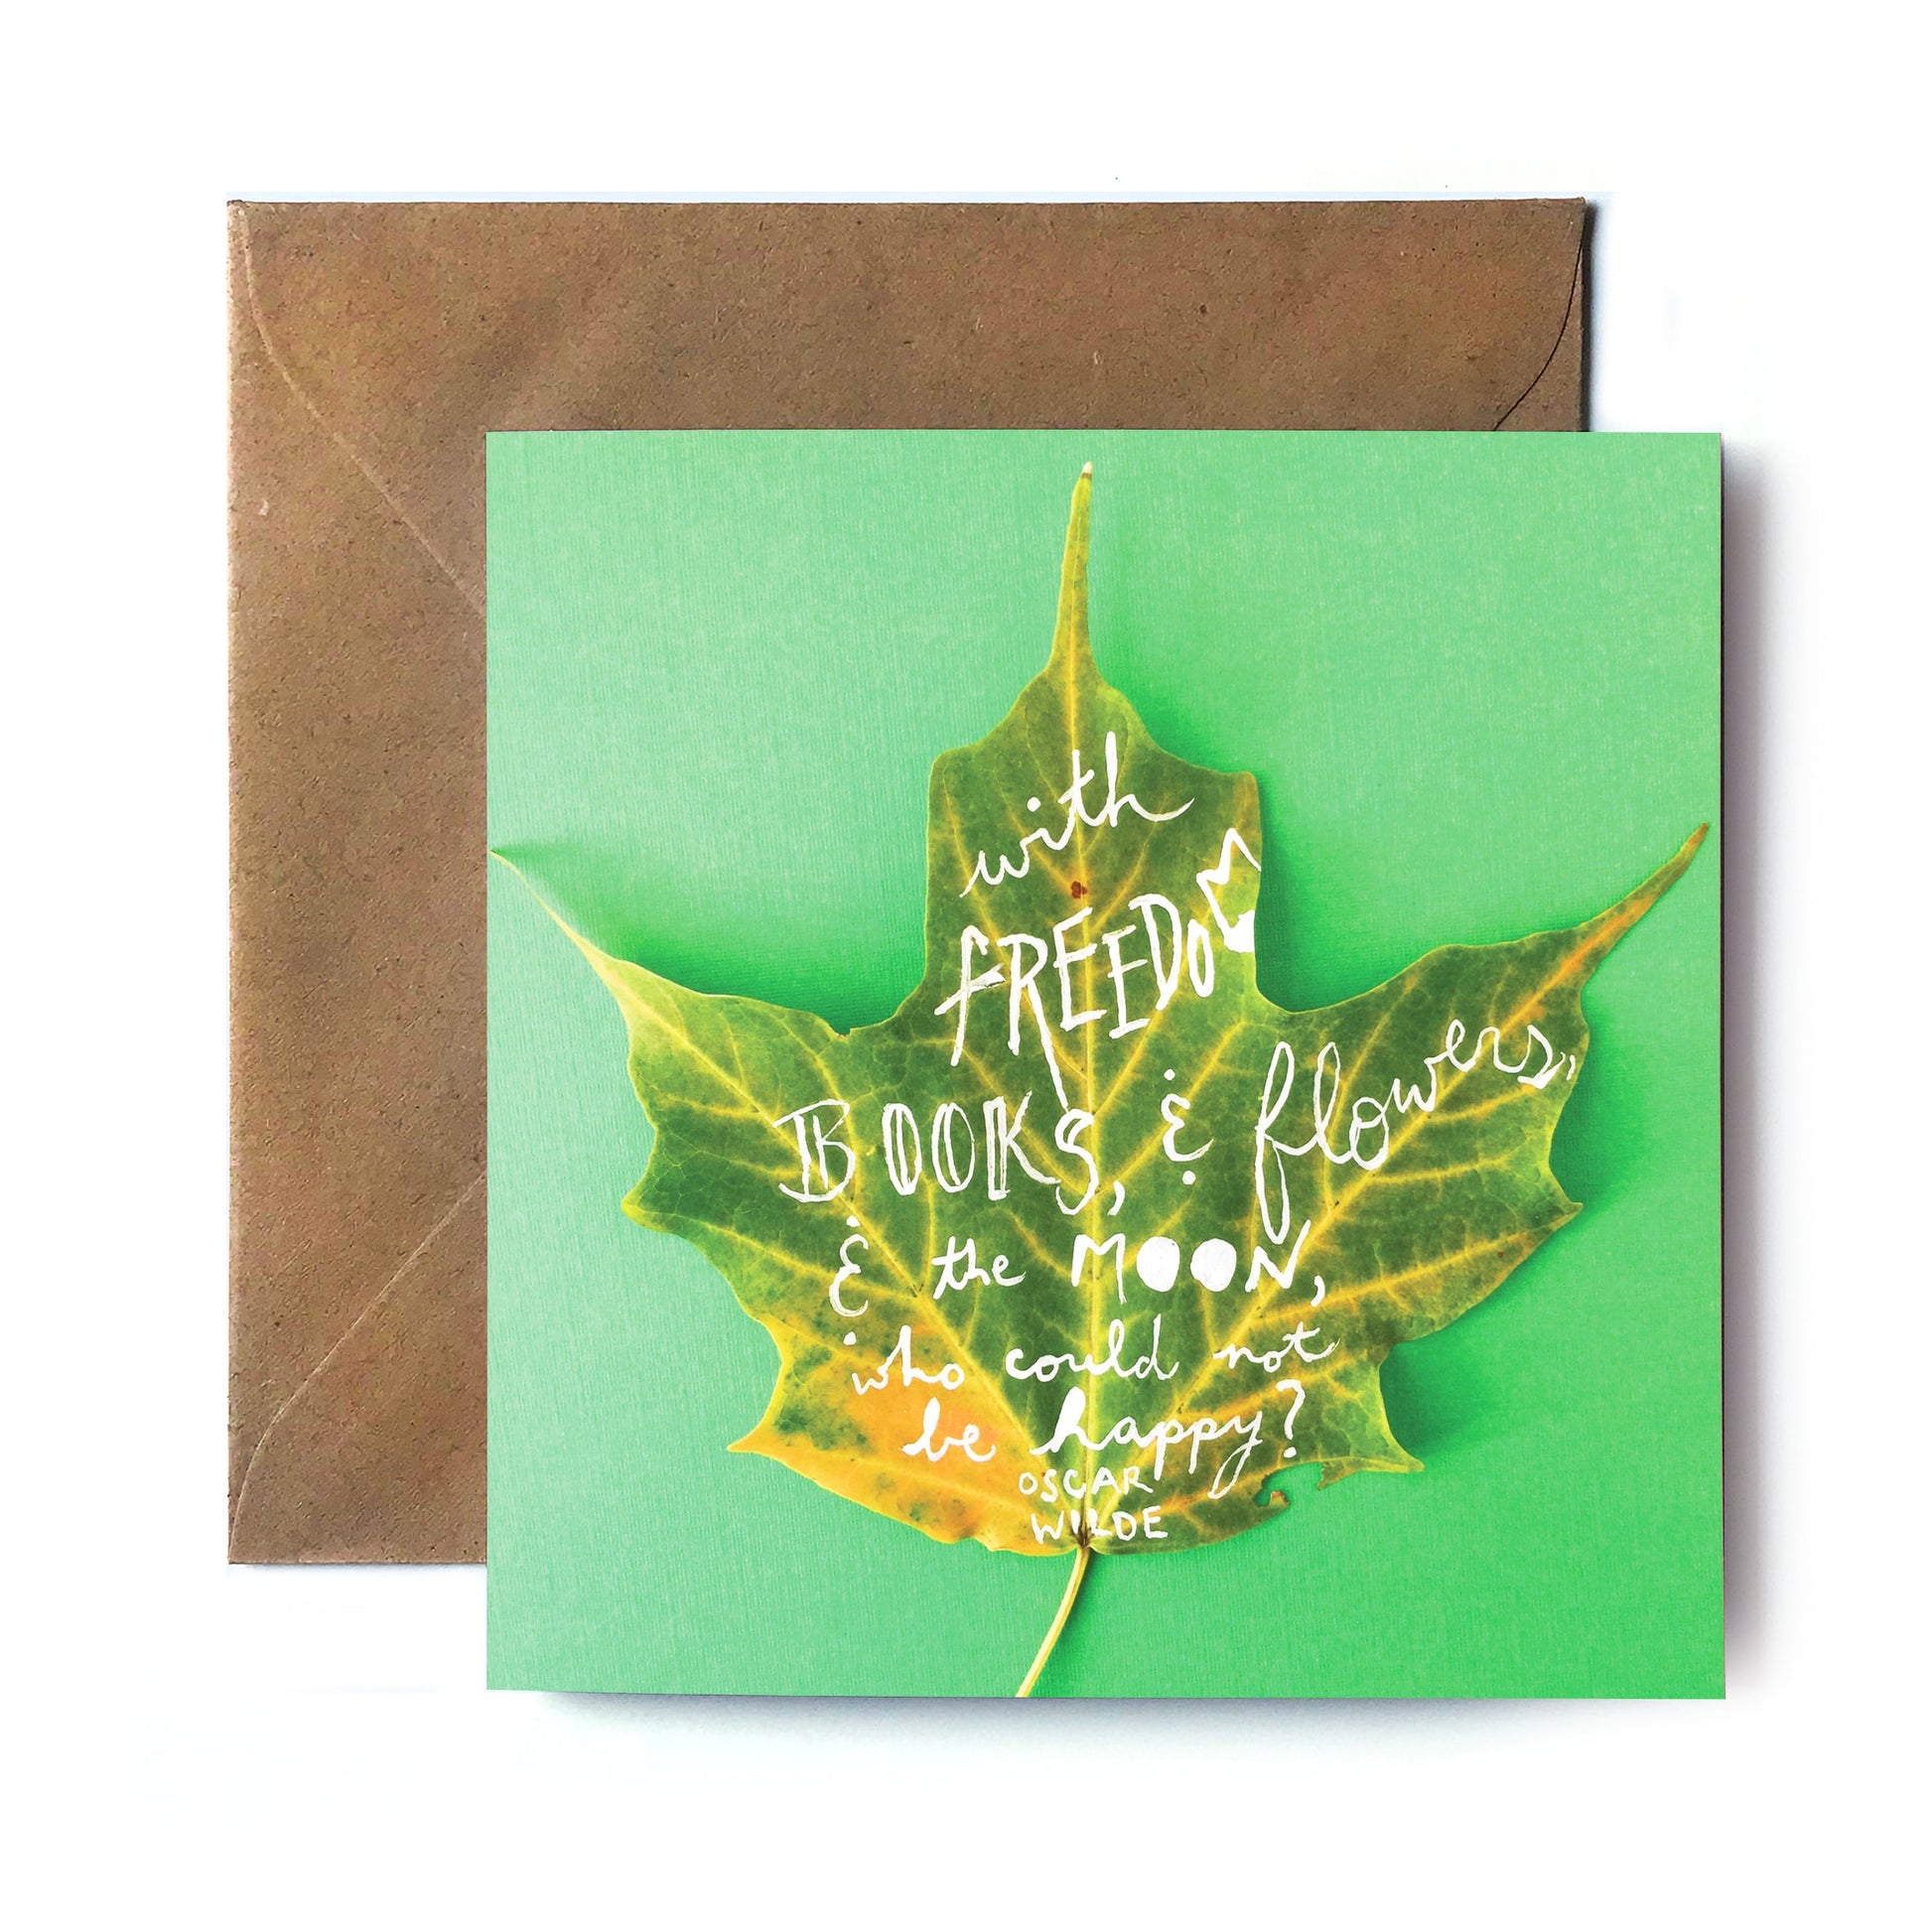 Complete Set of Leaf A Message Collection - Tiny and Snail